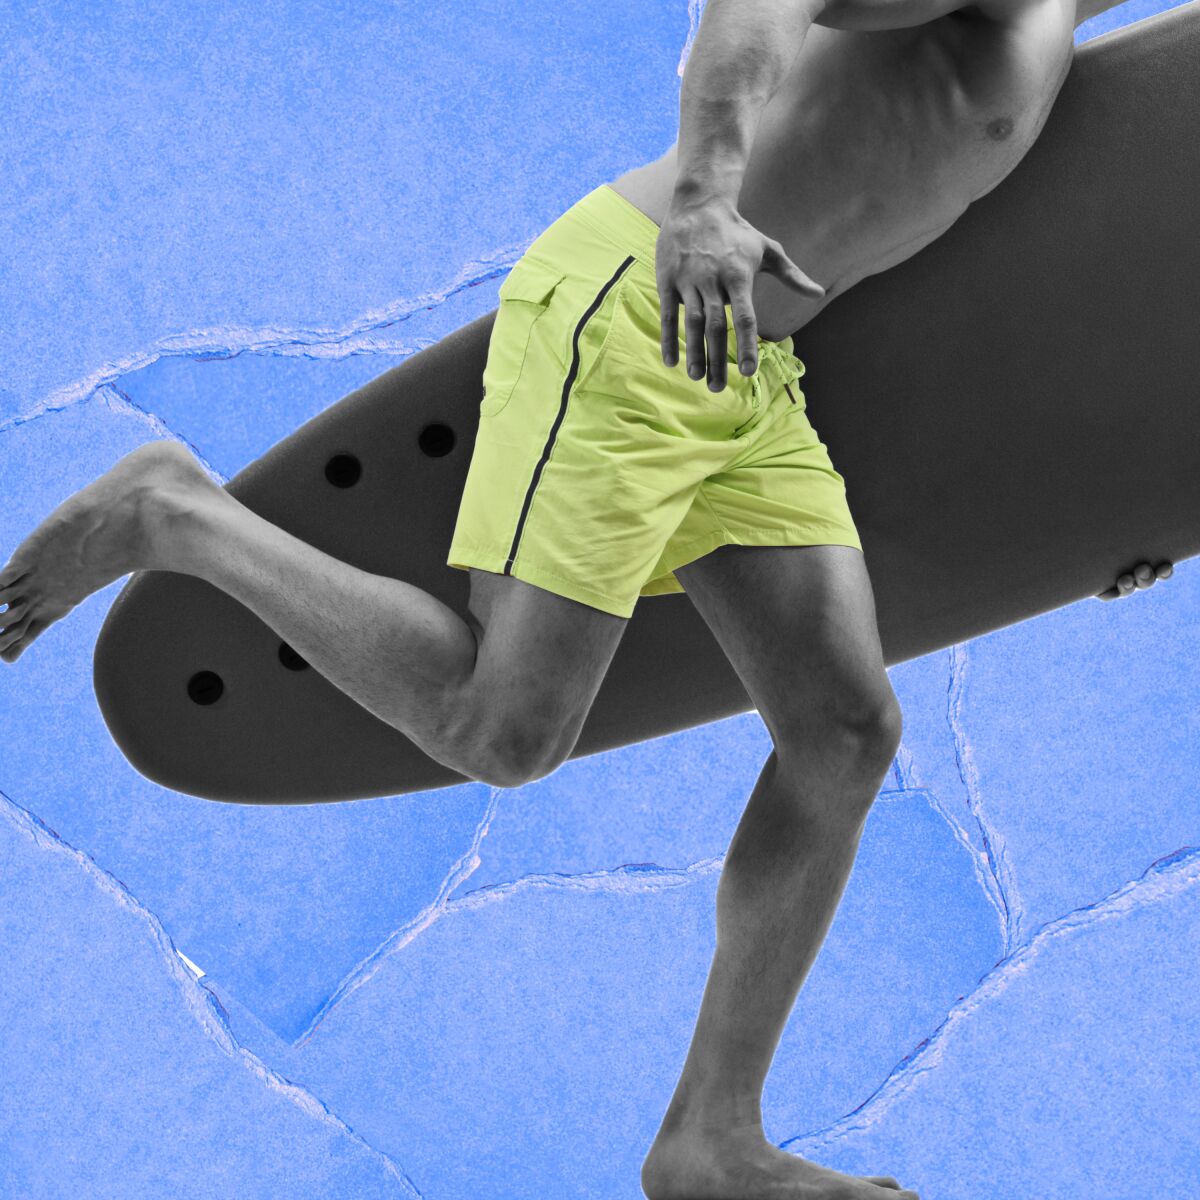 Closeup of the torso and legs of a person in board shorts carrying a surfboard and running.